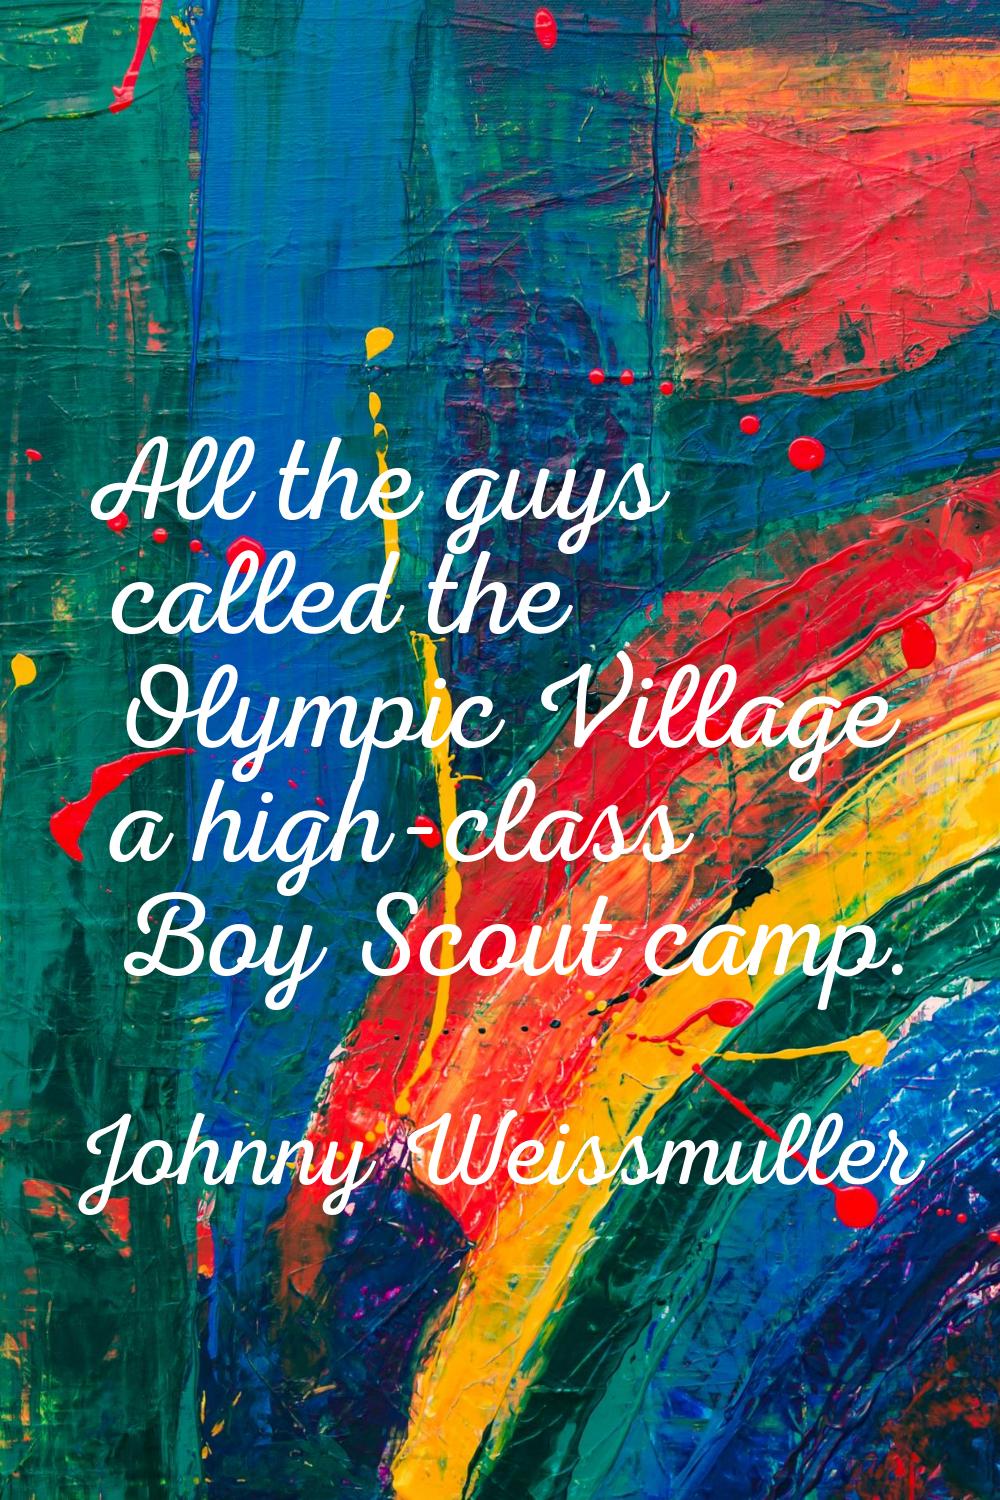 All the guys called the Olympic Village a high-class Boy Scout camp.